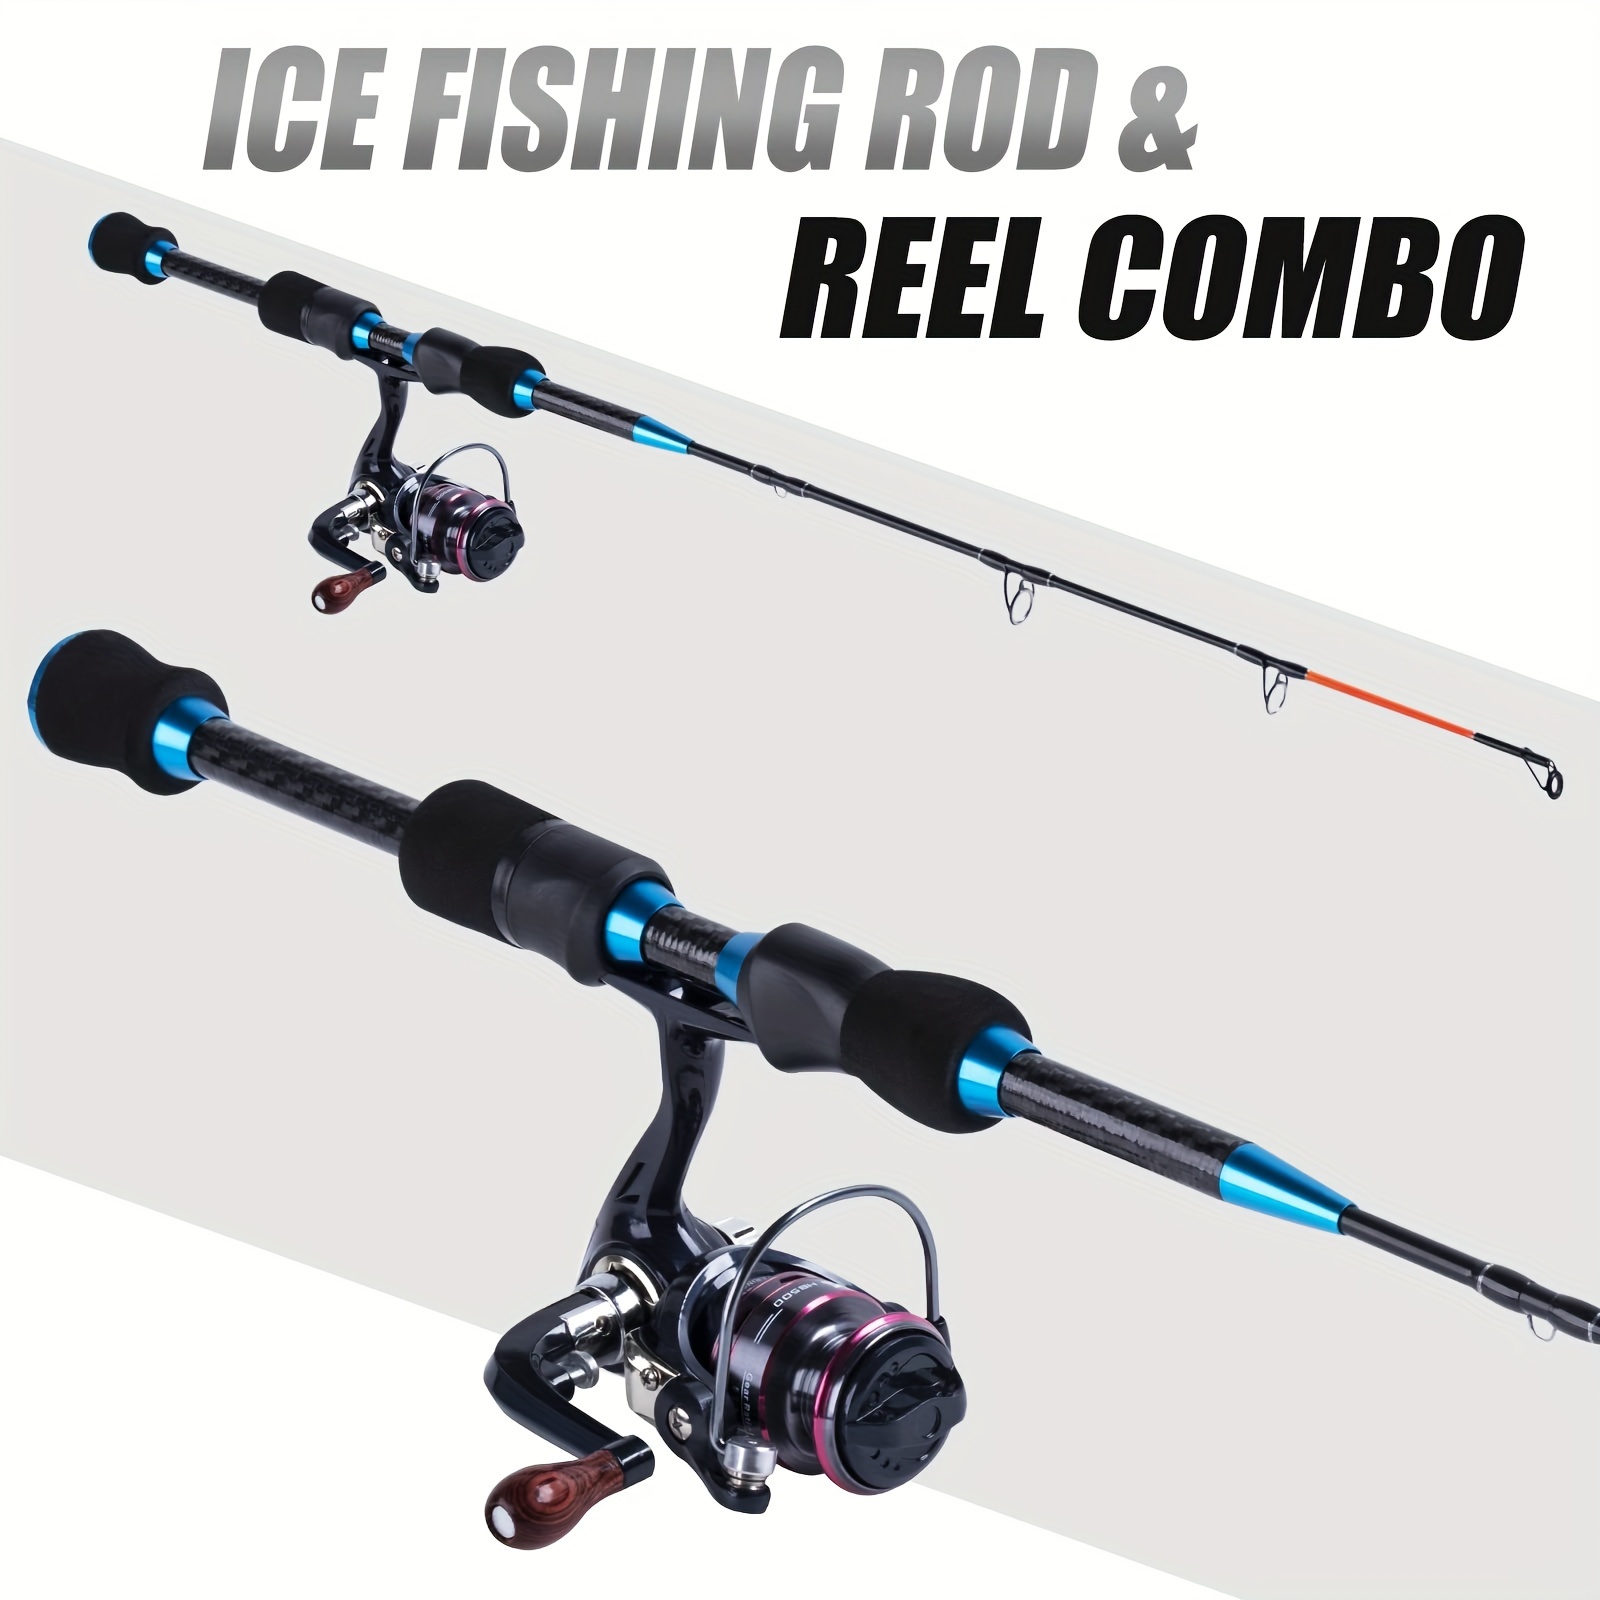 Tuxedo Sailor Ice Fishing Rod, Reinforced Fiber/Ultra-Light Material Pole - Detachable Design- Suitable for Outdoor Fishing/Ice Fishing.